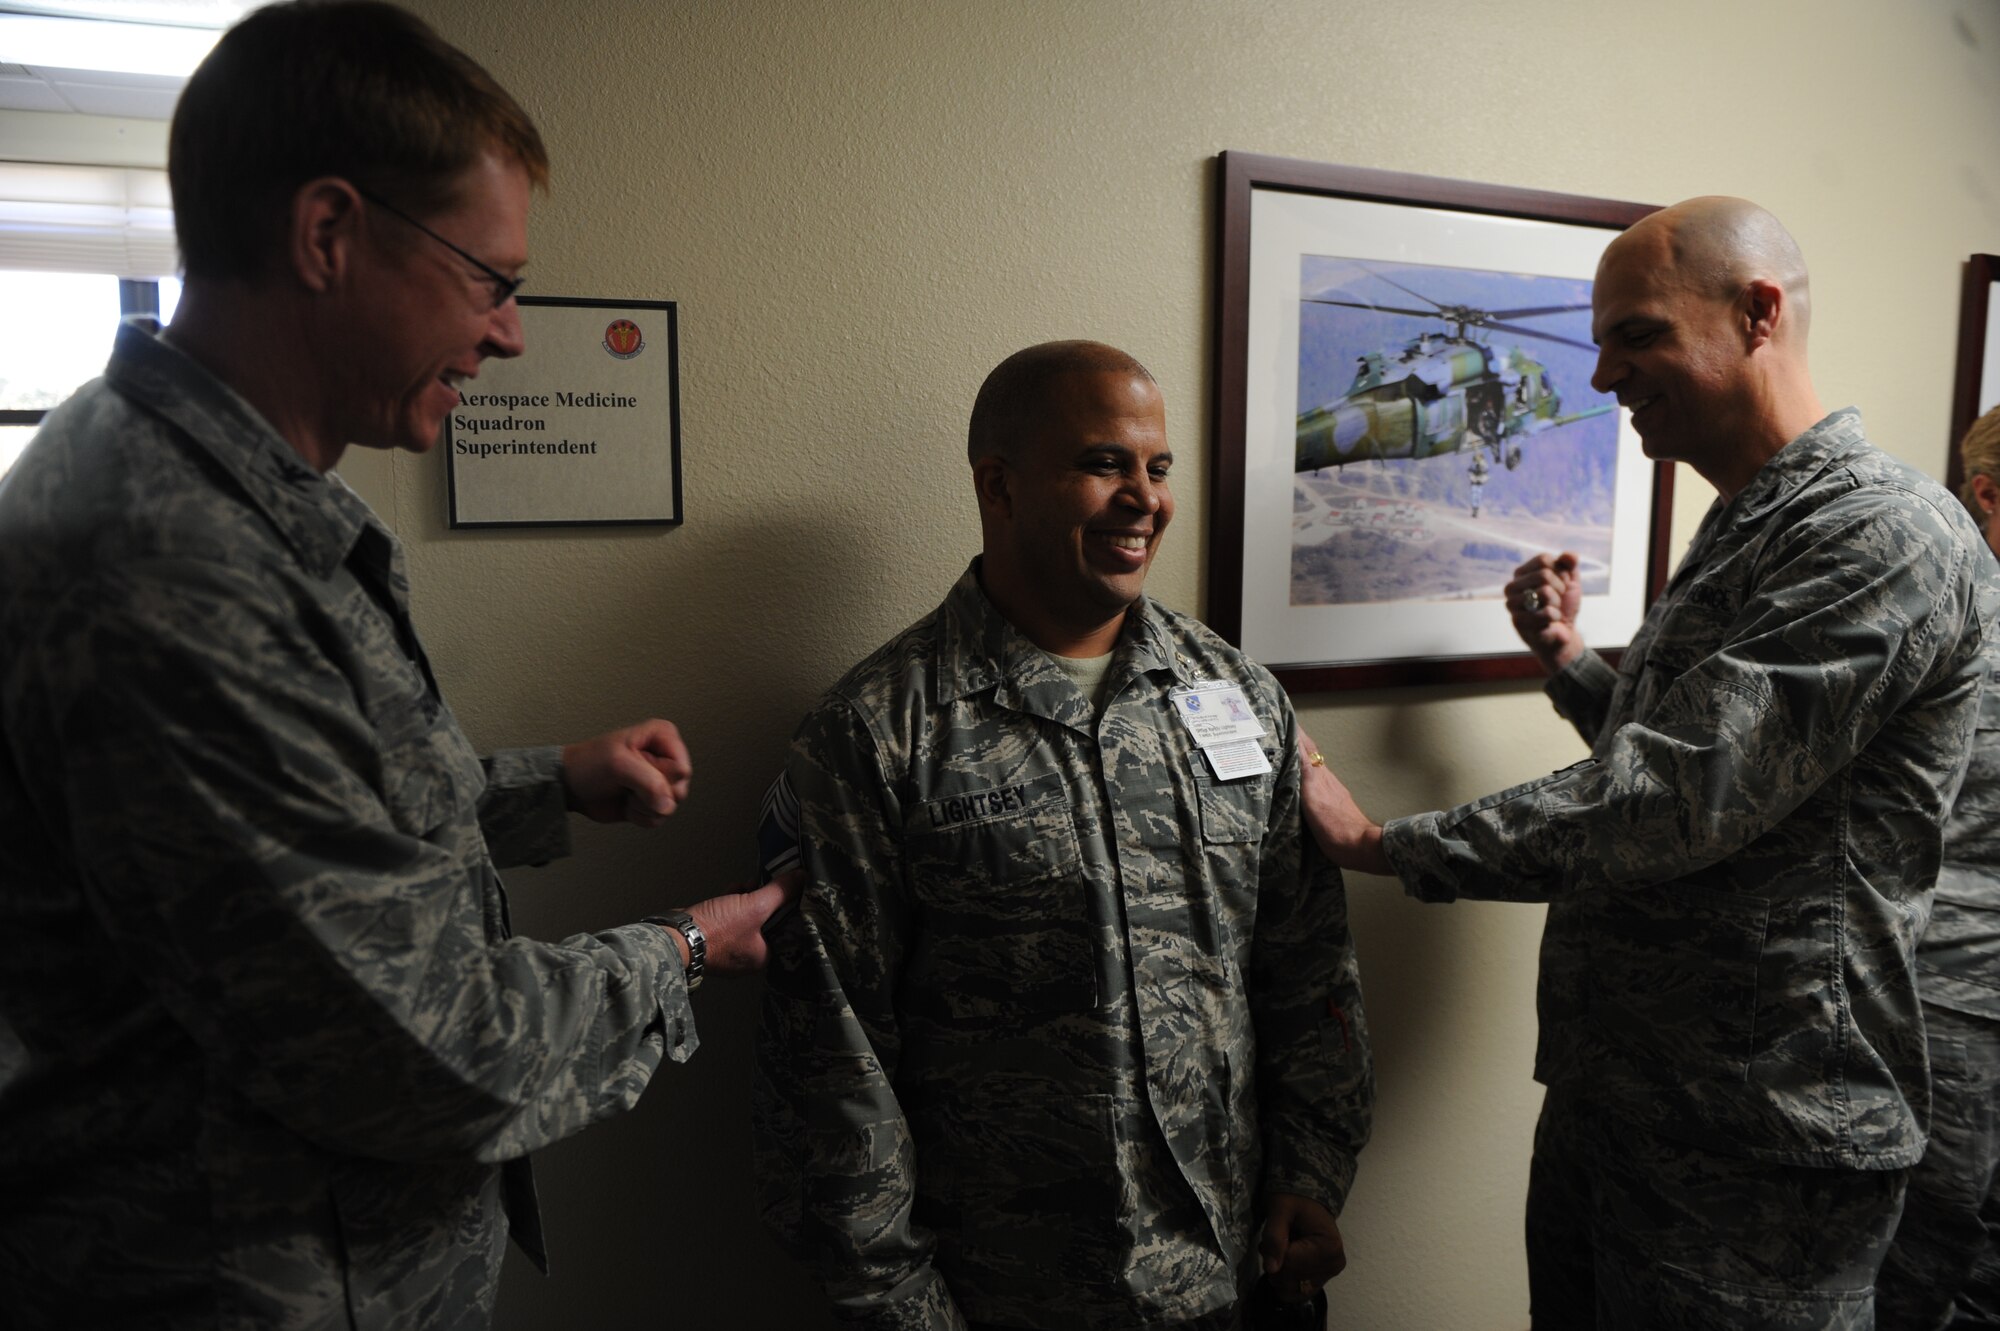 U.S. Air Force Senior Master Sgt. Randy Lightsey, 7th Aerospace Medicine Squadron superintendent, has his new stripes pinned on by Col. Michael Bob Starr, 7th Bomb Wing commander, and Col. Robert Bogart, 7th Medical Group commander, Nov. 11, 2014, at Dyess Air Force Base, Texas. Lightsey was among only 400 senior master sergeants in the Air Force selected for promotion to chief master sergeant. (U.S. Air Force photo by Airman 1st Class Alexander Guerrero/Released)